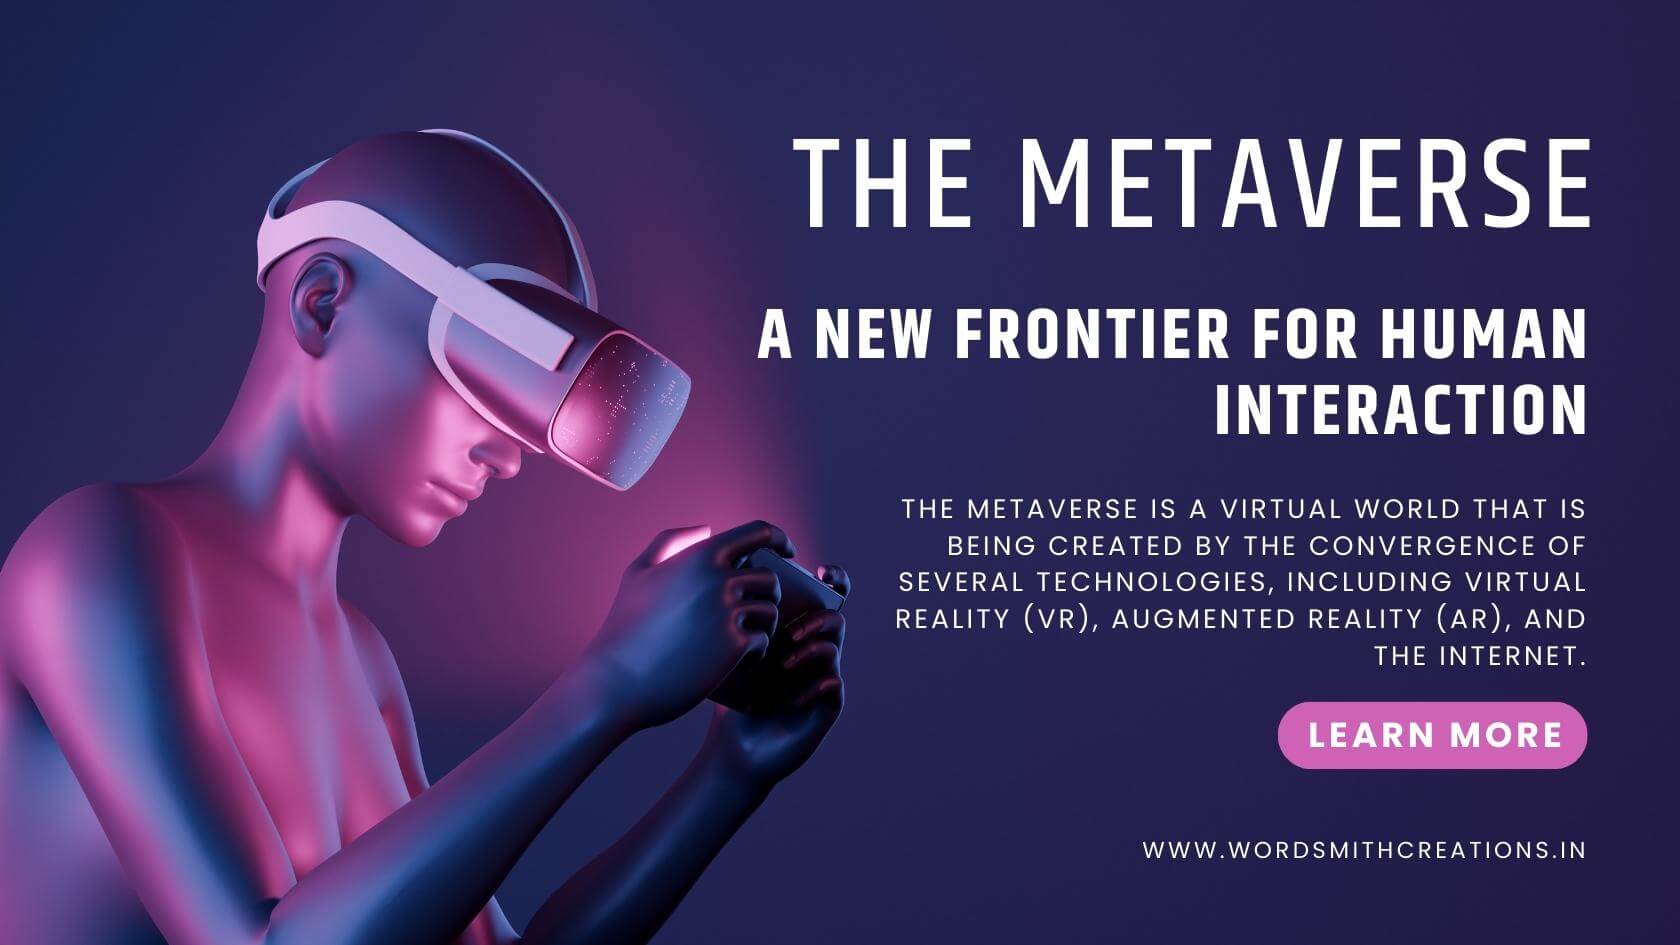 The Metaverse: A New Frontier for Human Interaction